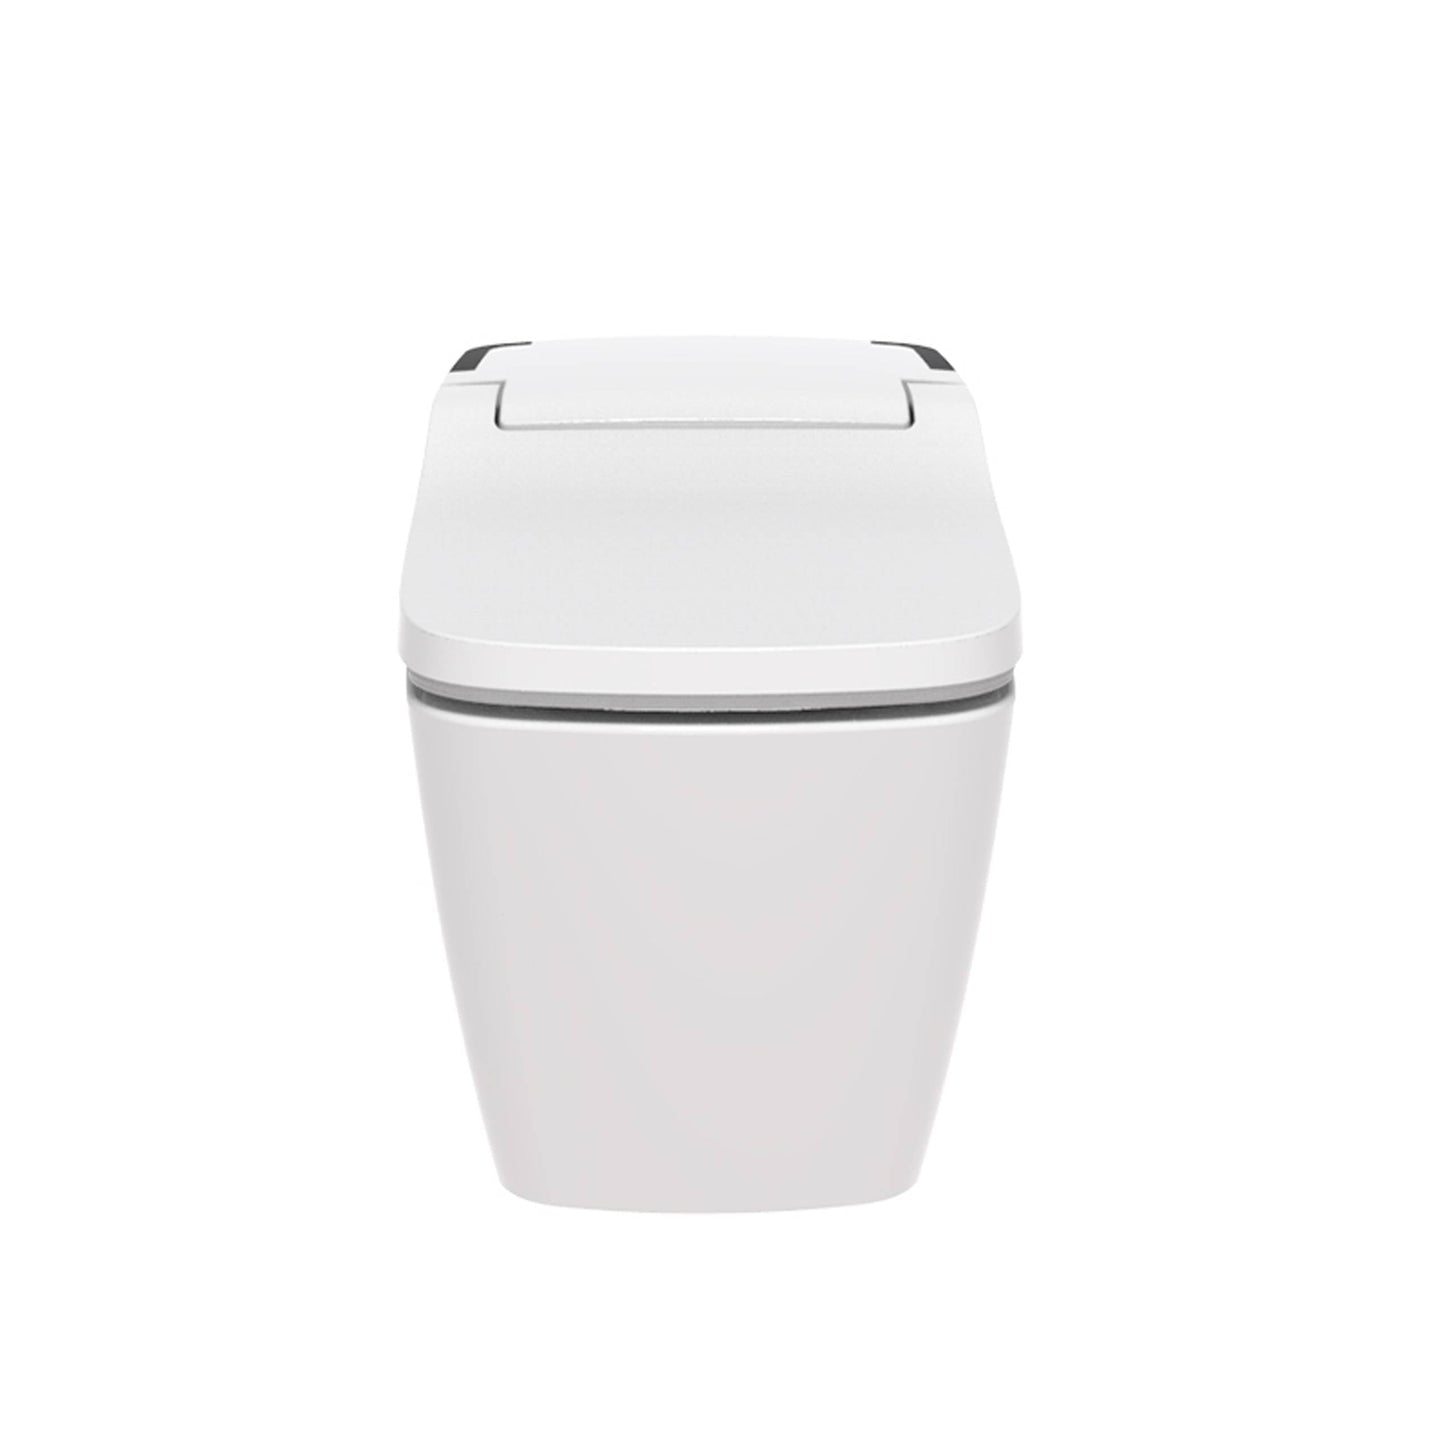 VOVO Stylement TCB-090SA Electric Integrated Smart Bidet Toilet With Auto Open and Close Lid, Auto Flush, UV LED Sterilization, Heated Seat, Warm Dry and Water and Remote Control